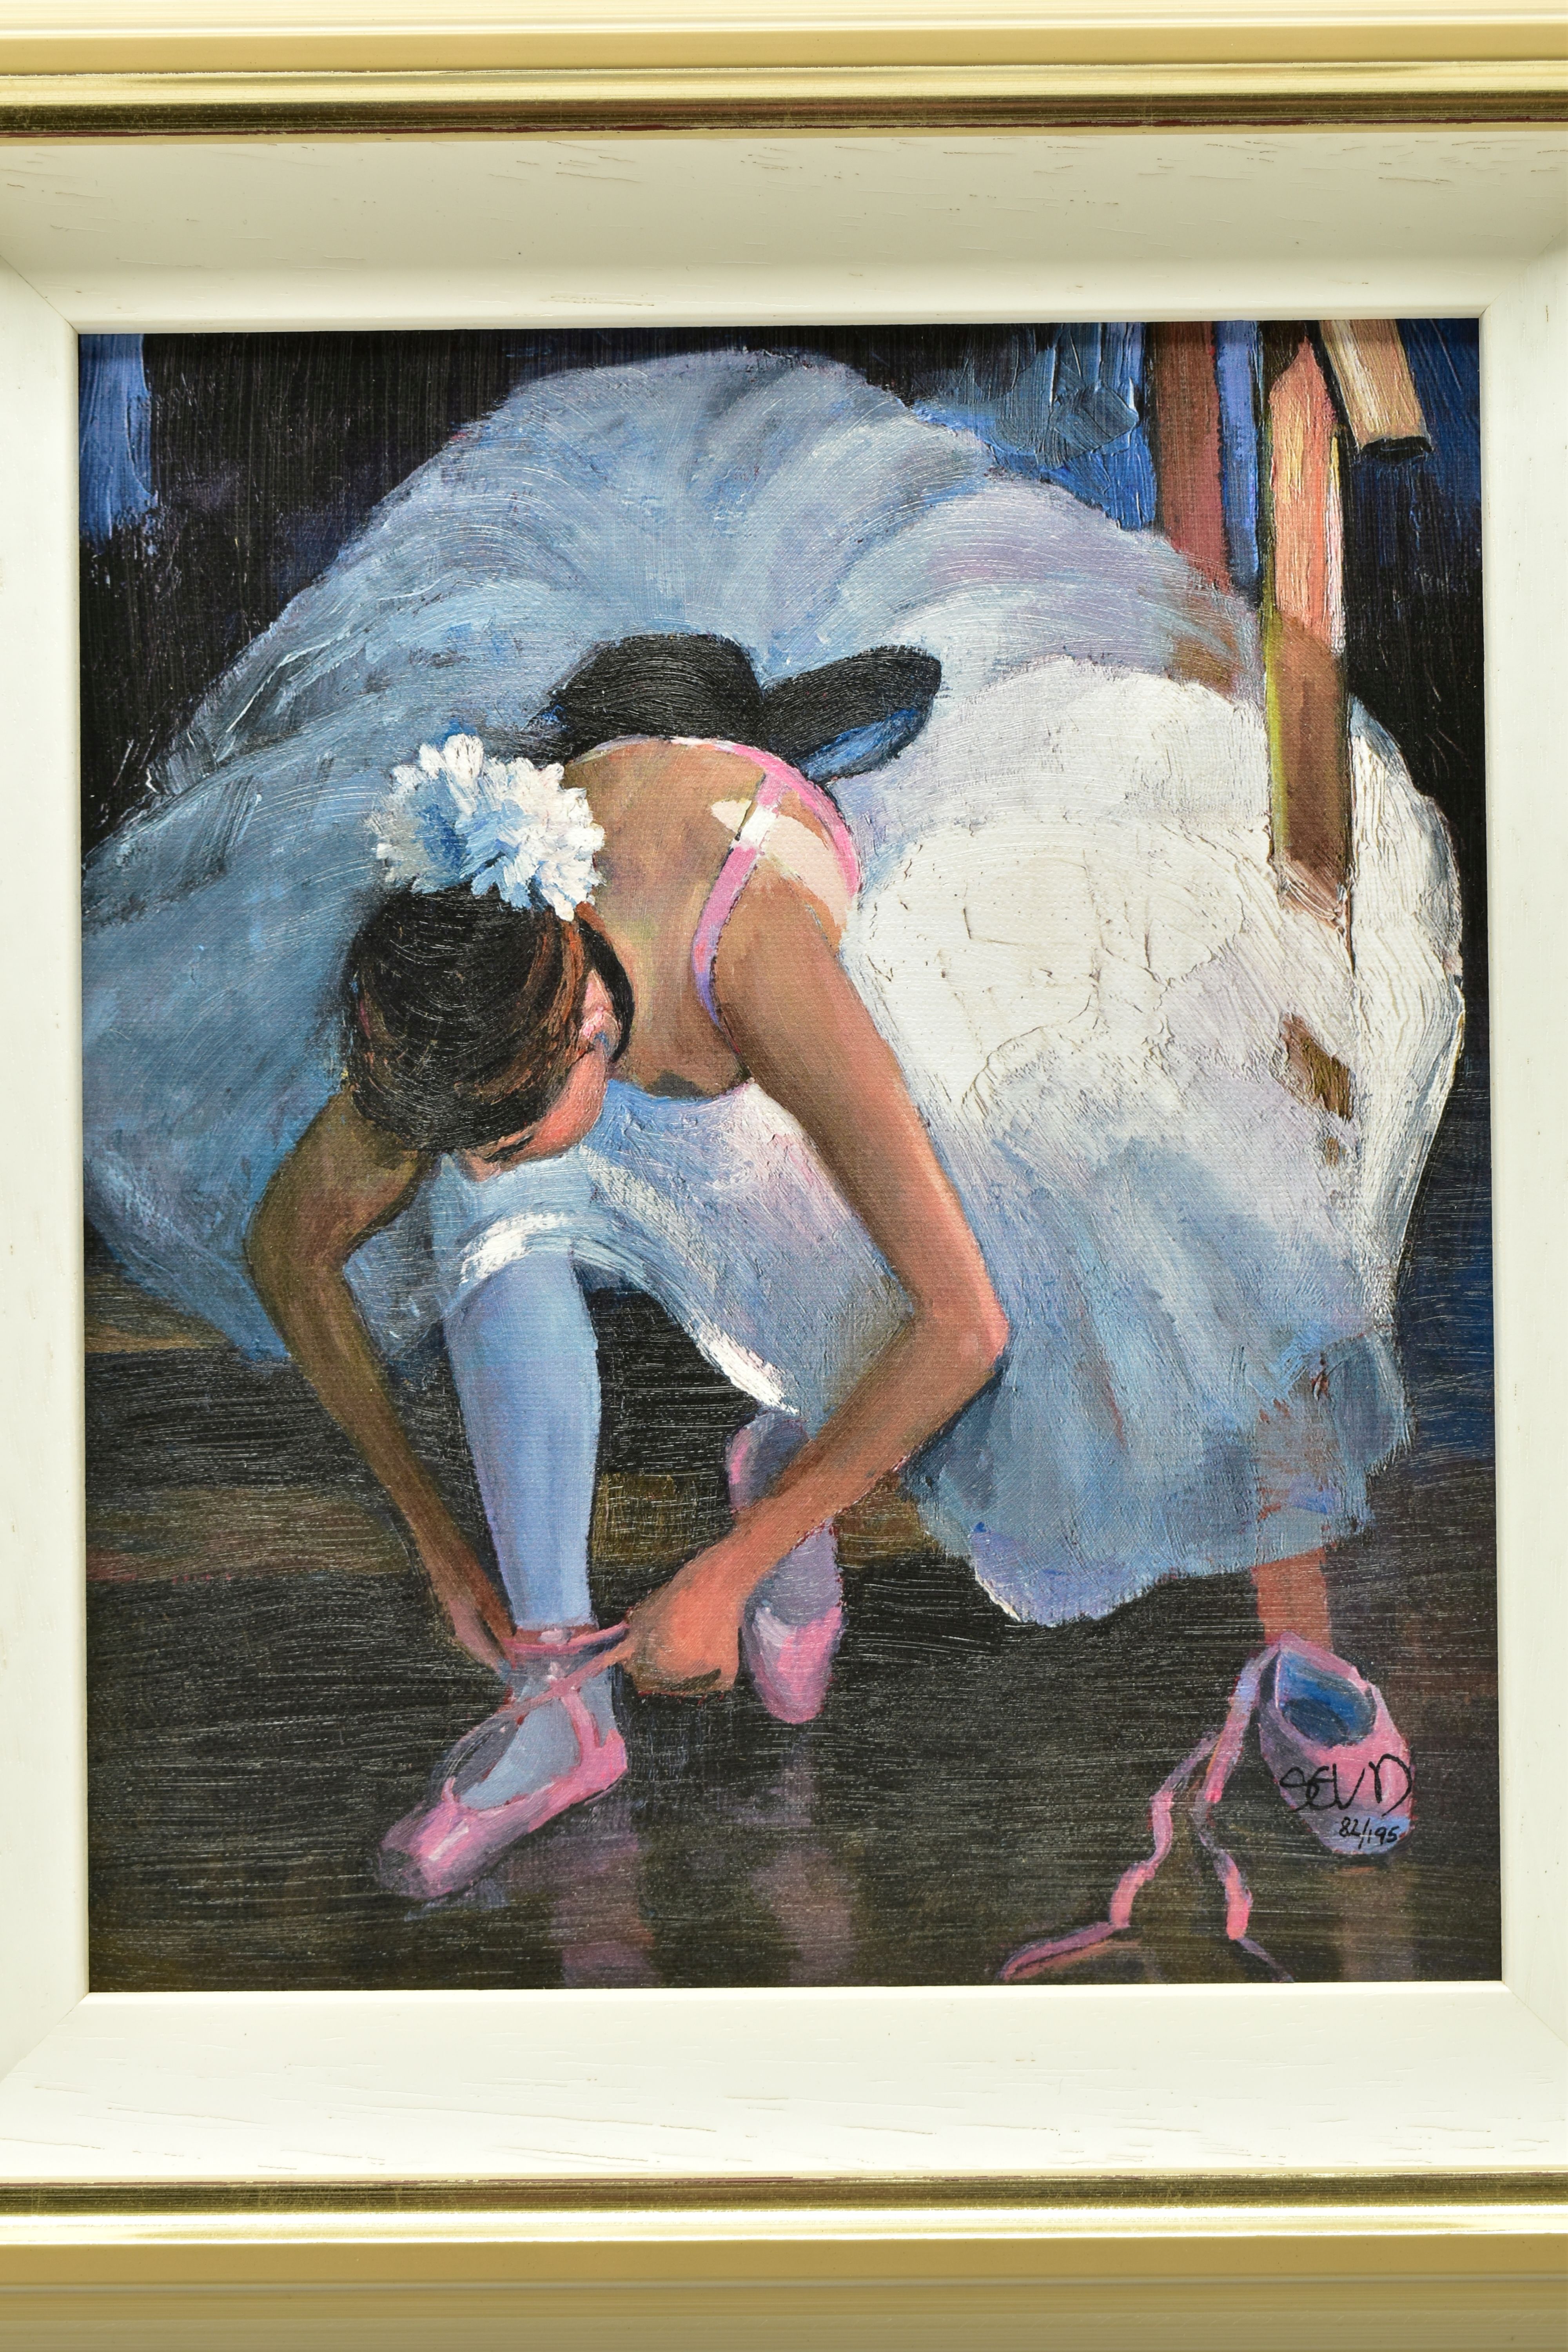 SHERREE VALENTINE DAINES (BRITISH 1959) 'THE PINK SLIPPER', a signed limited edition print depicting - Image 2 of 5